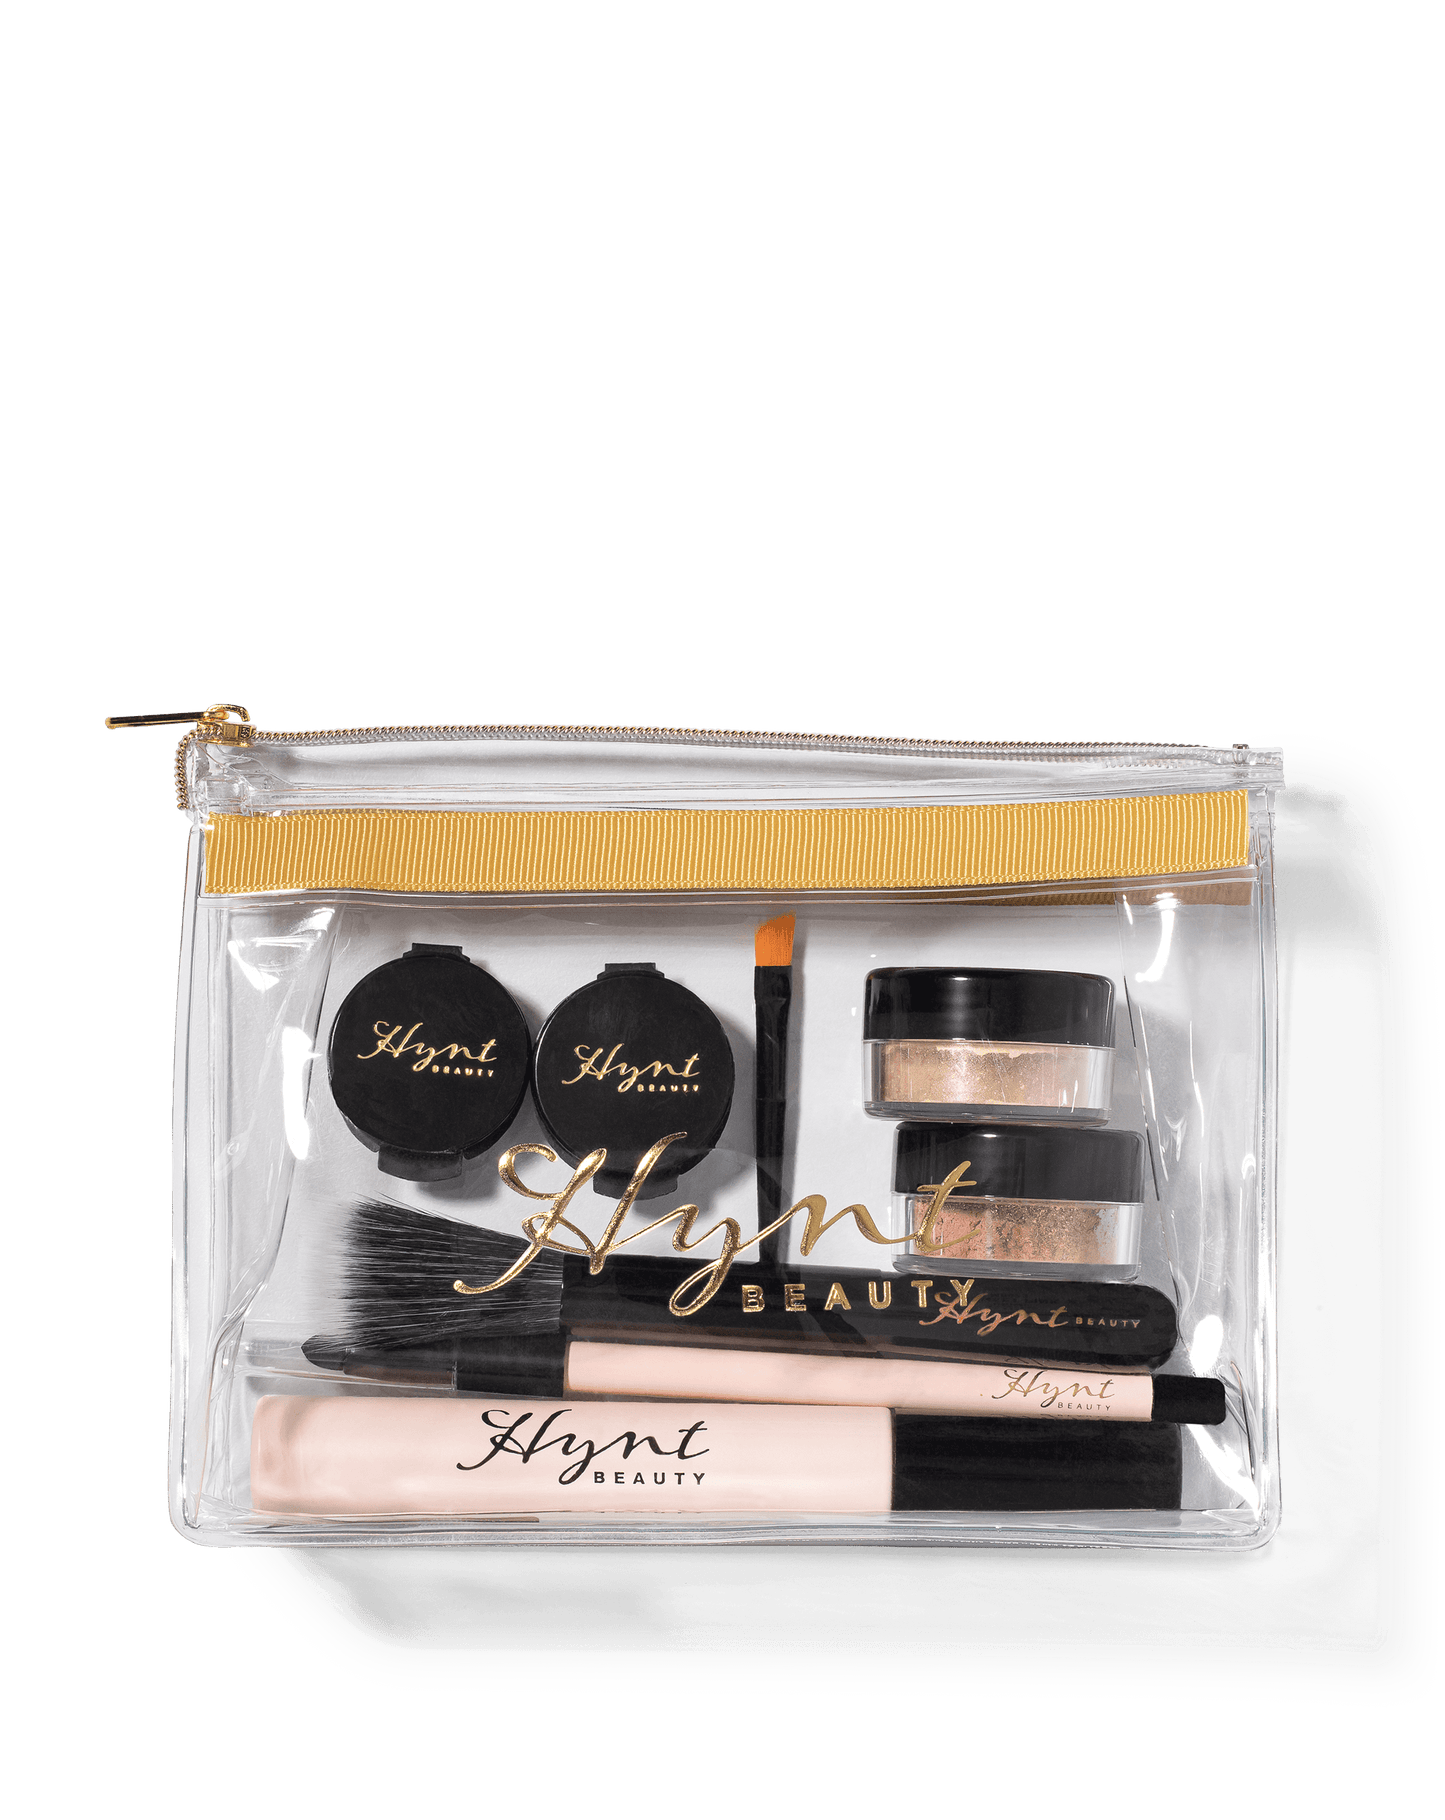 ${ title} at $46 only from Hynt Beauty